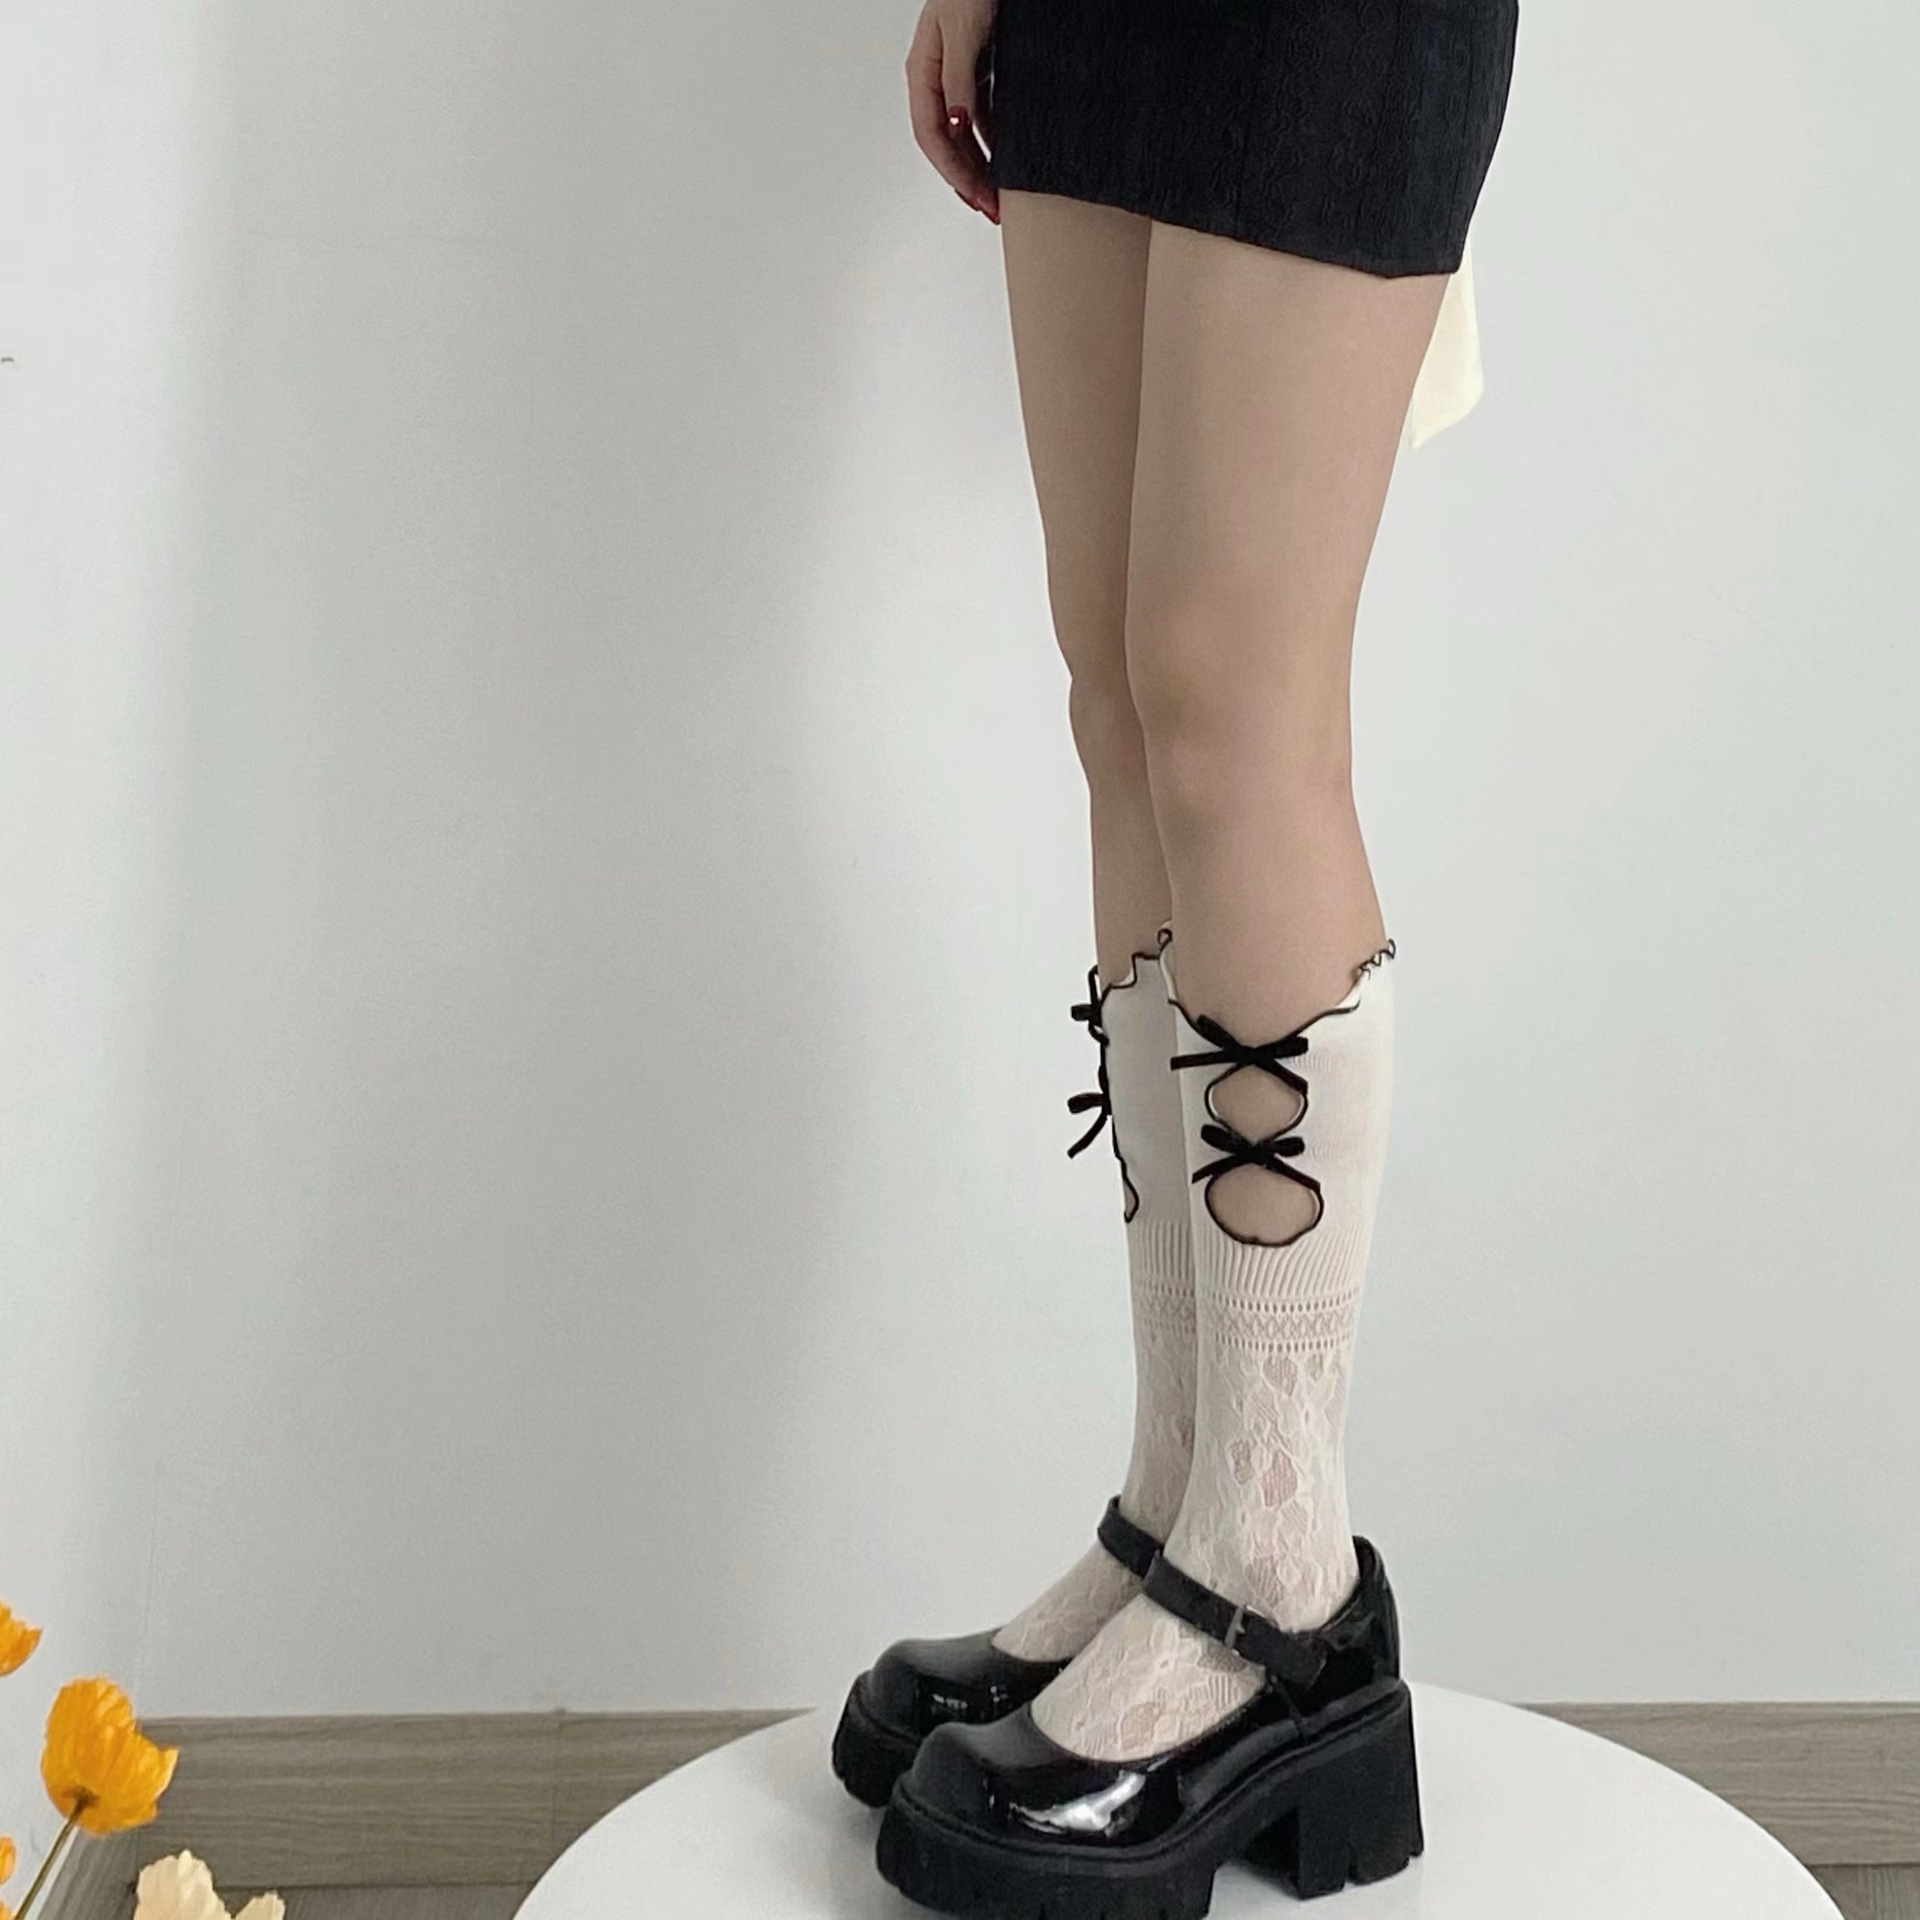 Water Same Style Cute Sweet Cool Double Layer Hollow Lace Flocking Bow Fishnet Stockings Socks Calf Socks Two-Way Wear